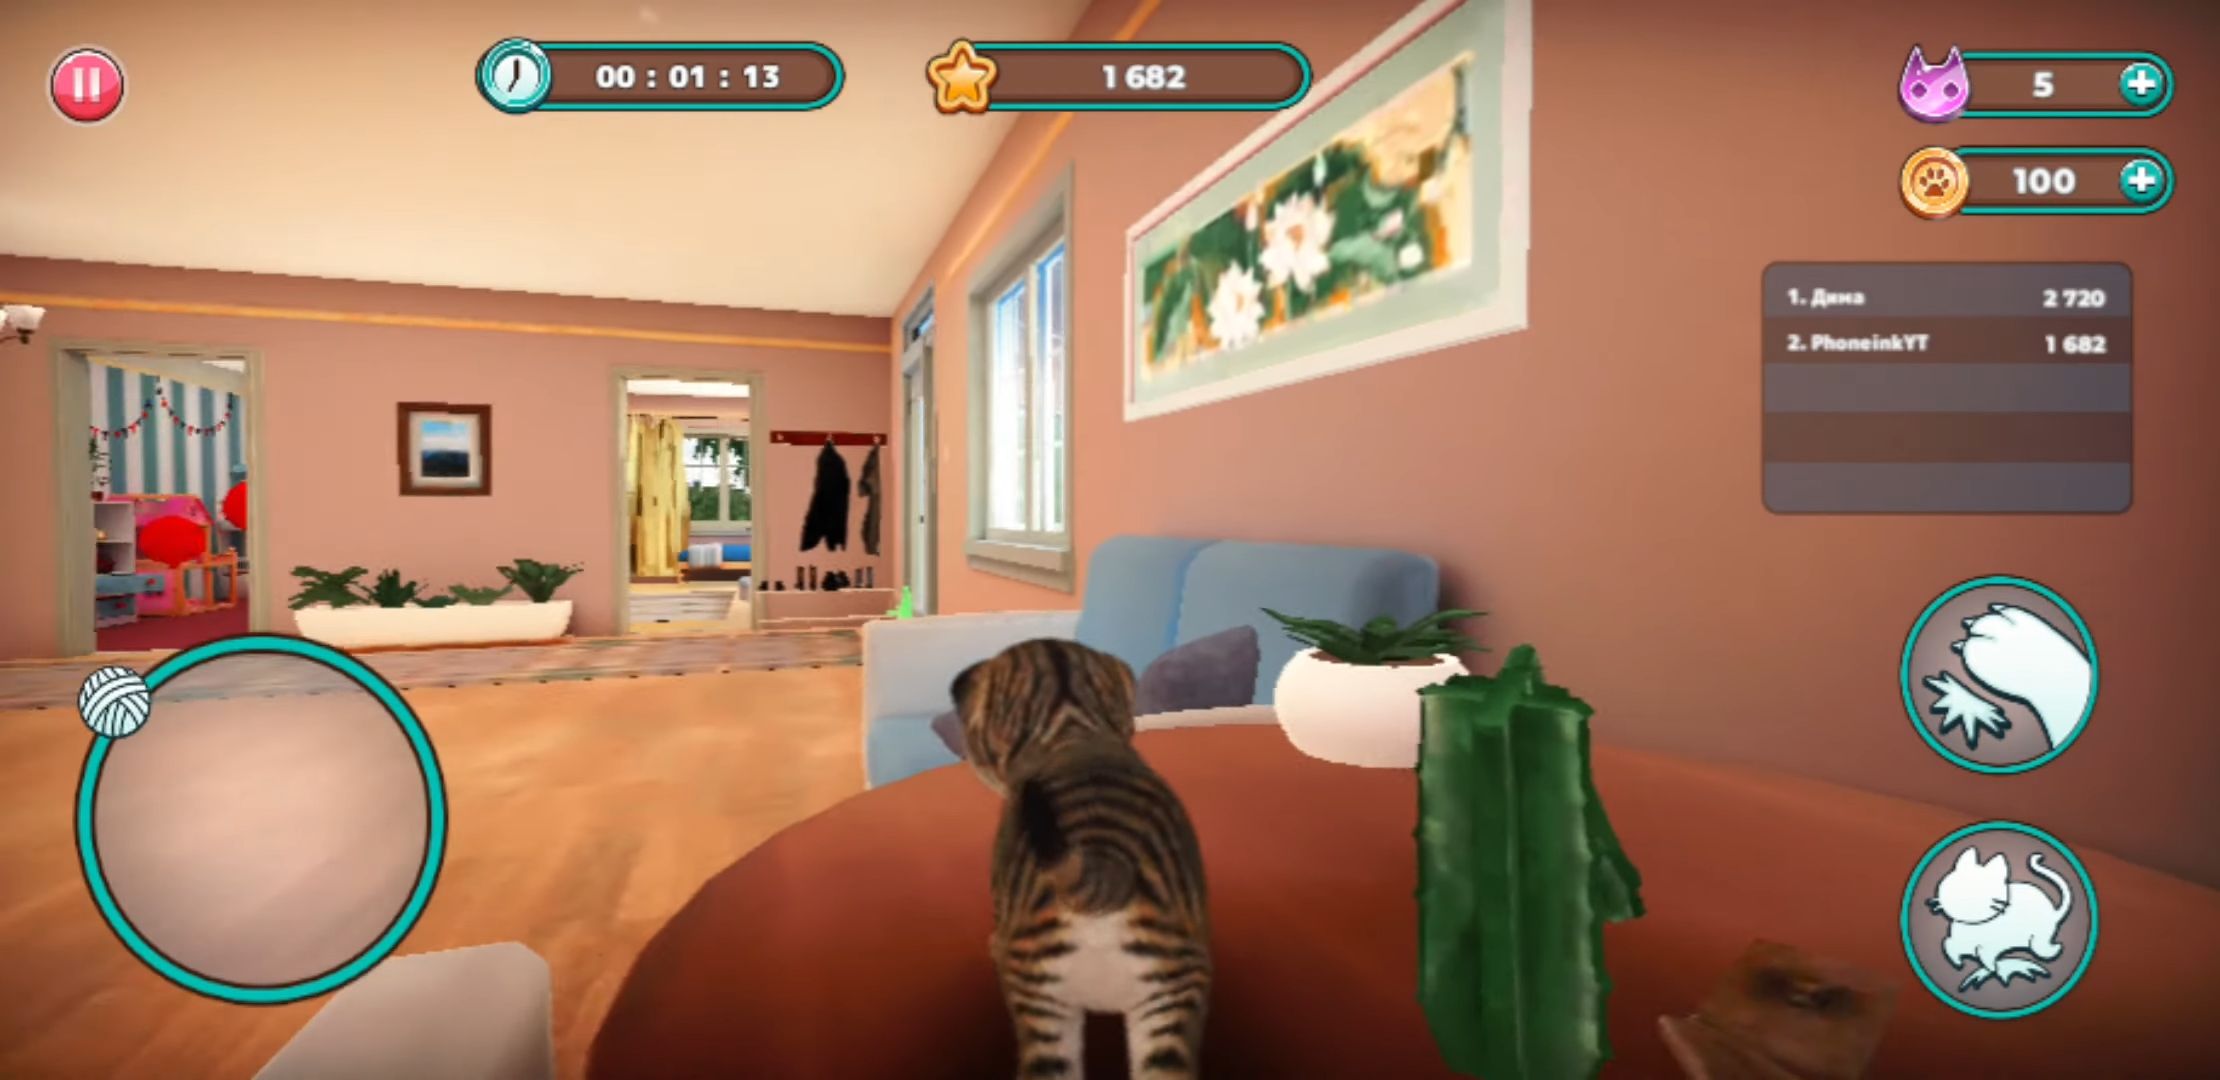 Full version of Android apk app Cat Simulator 2 for tablet and phone.